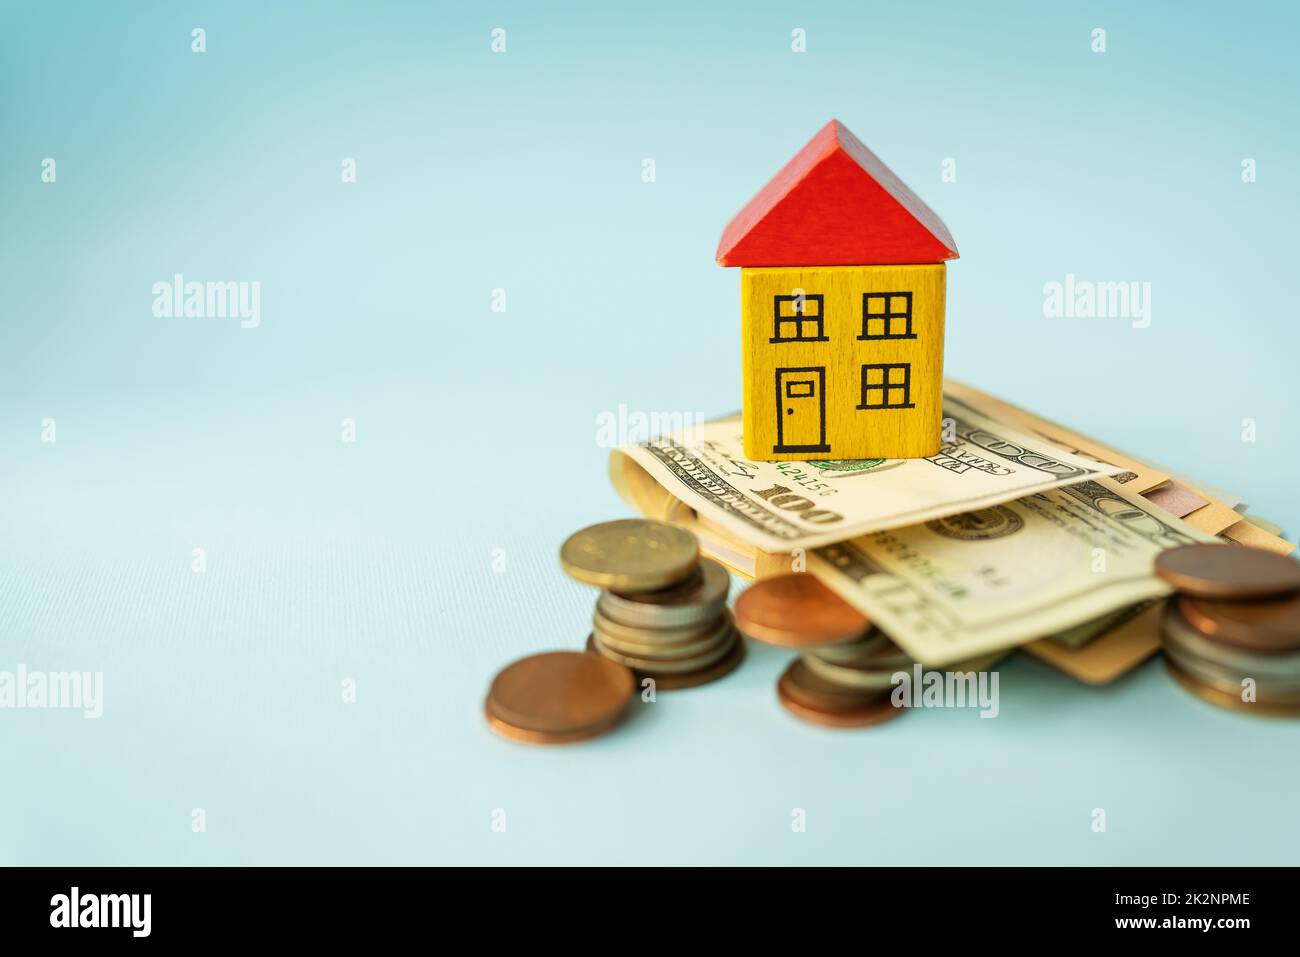 Money in international currency, including euro, dollar, a coin on which there is a toy house. The concept of mortgages, investments, loans, debts, housing purchases: apartments or houses. Stock Photo